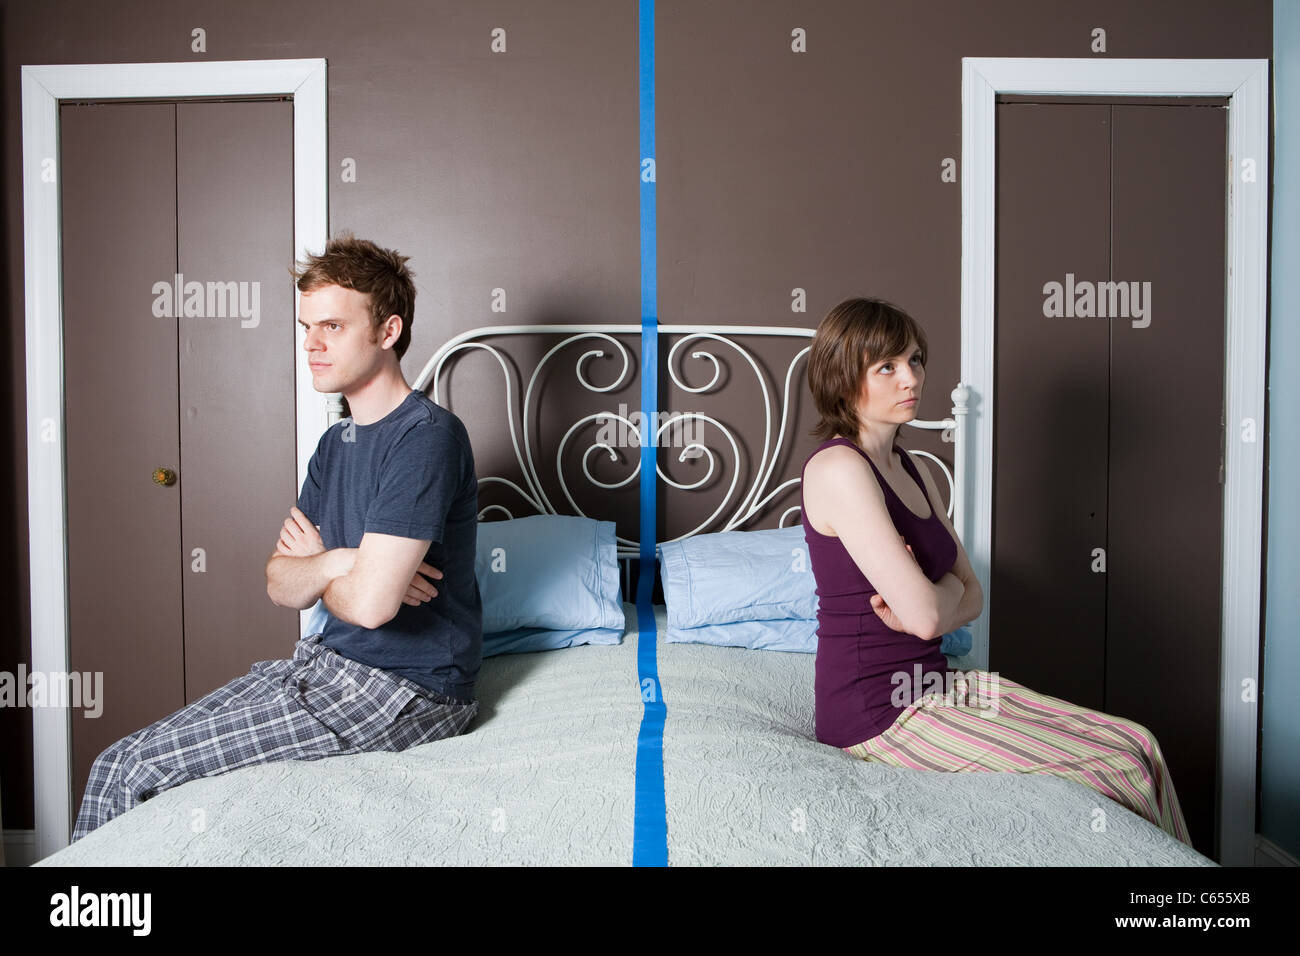 Young couple sitting on bed separated by blue line Stock Photo